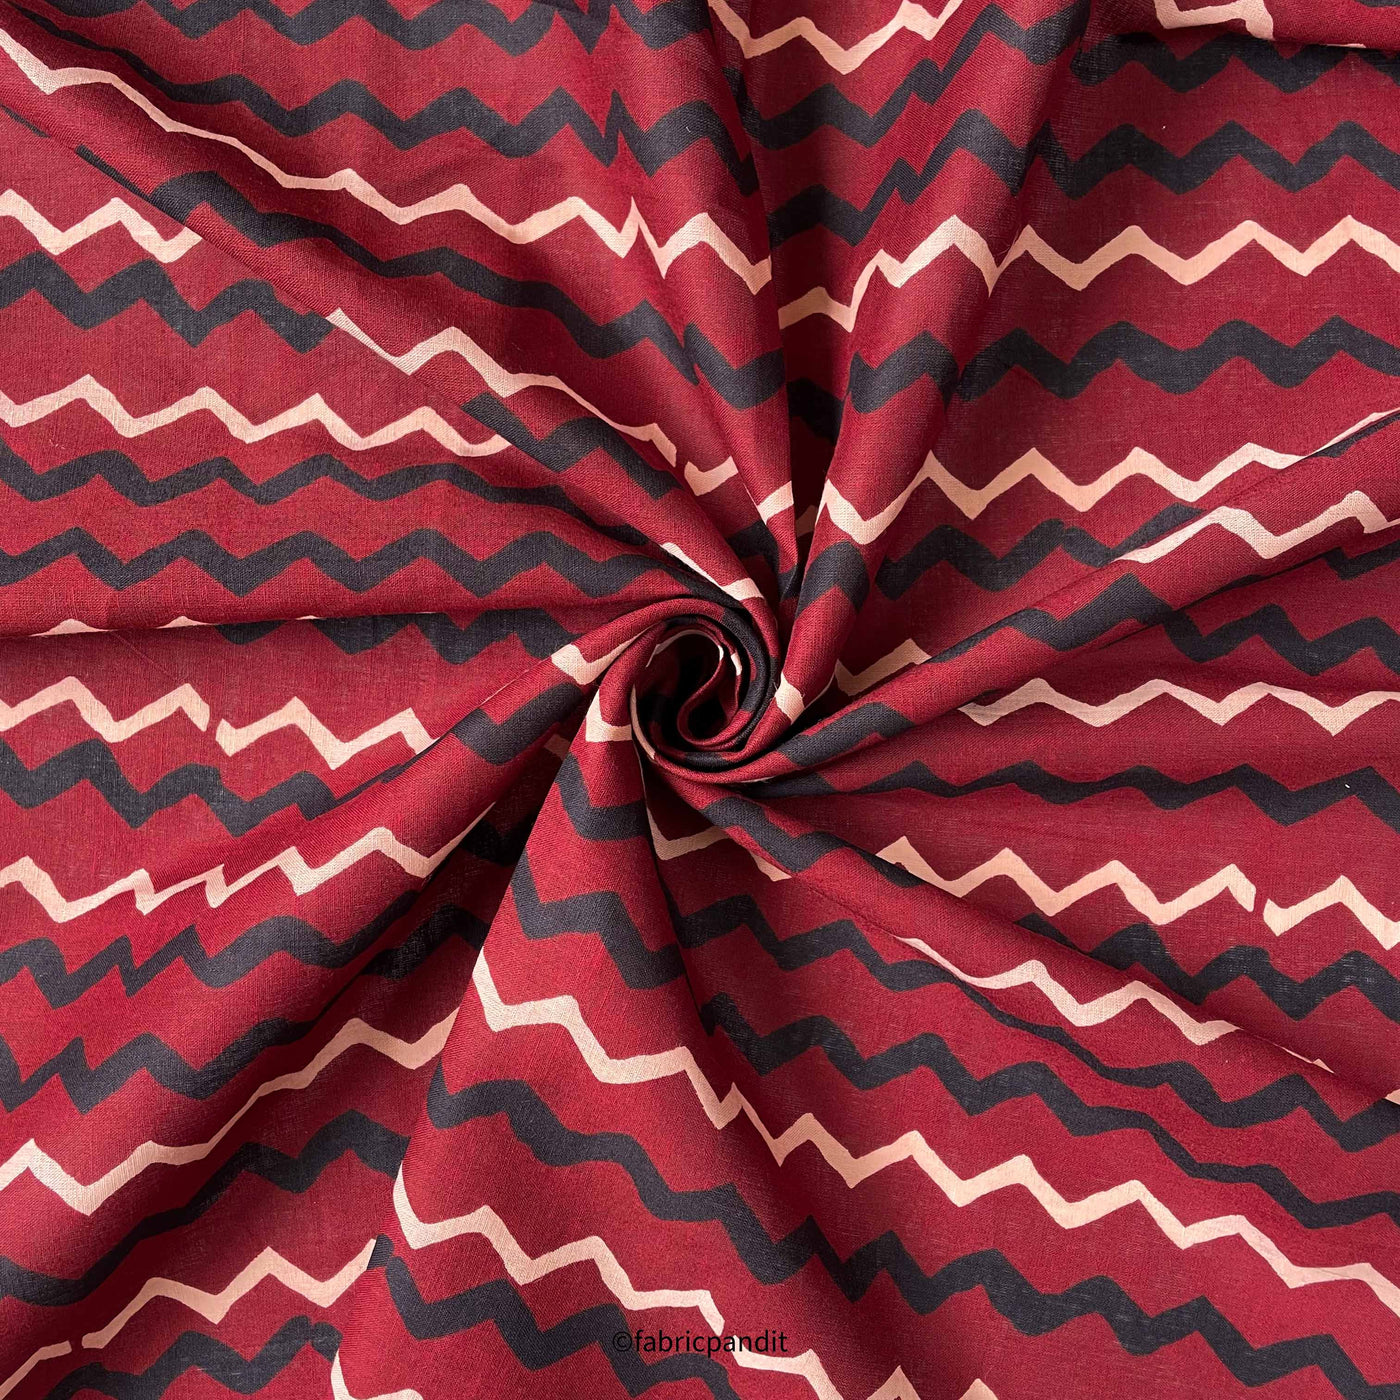 Fabric Pandit Fabric Red & Black Zig- Zag Pattern Hand Block Printed Pure Cotton Fabric (Width 42 inches)